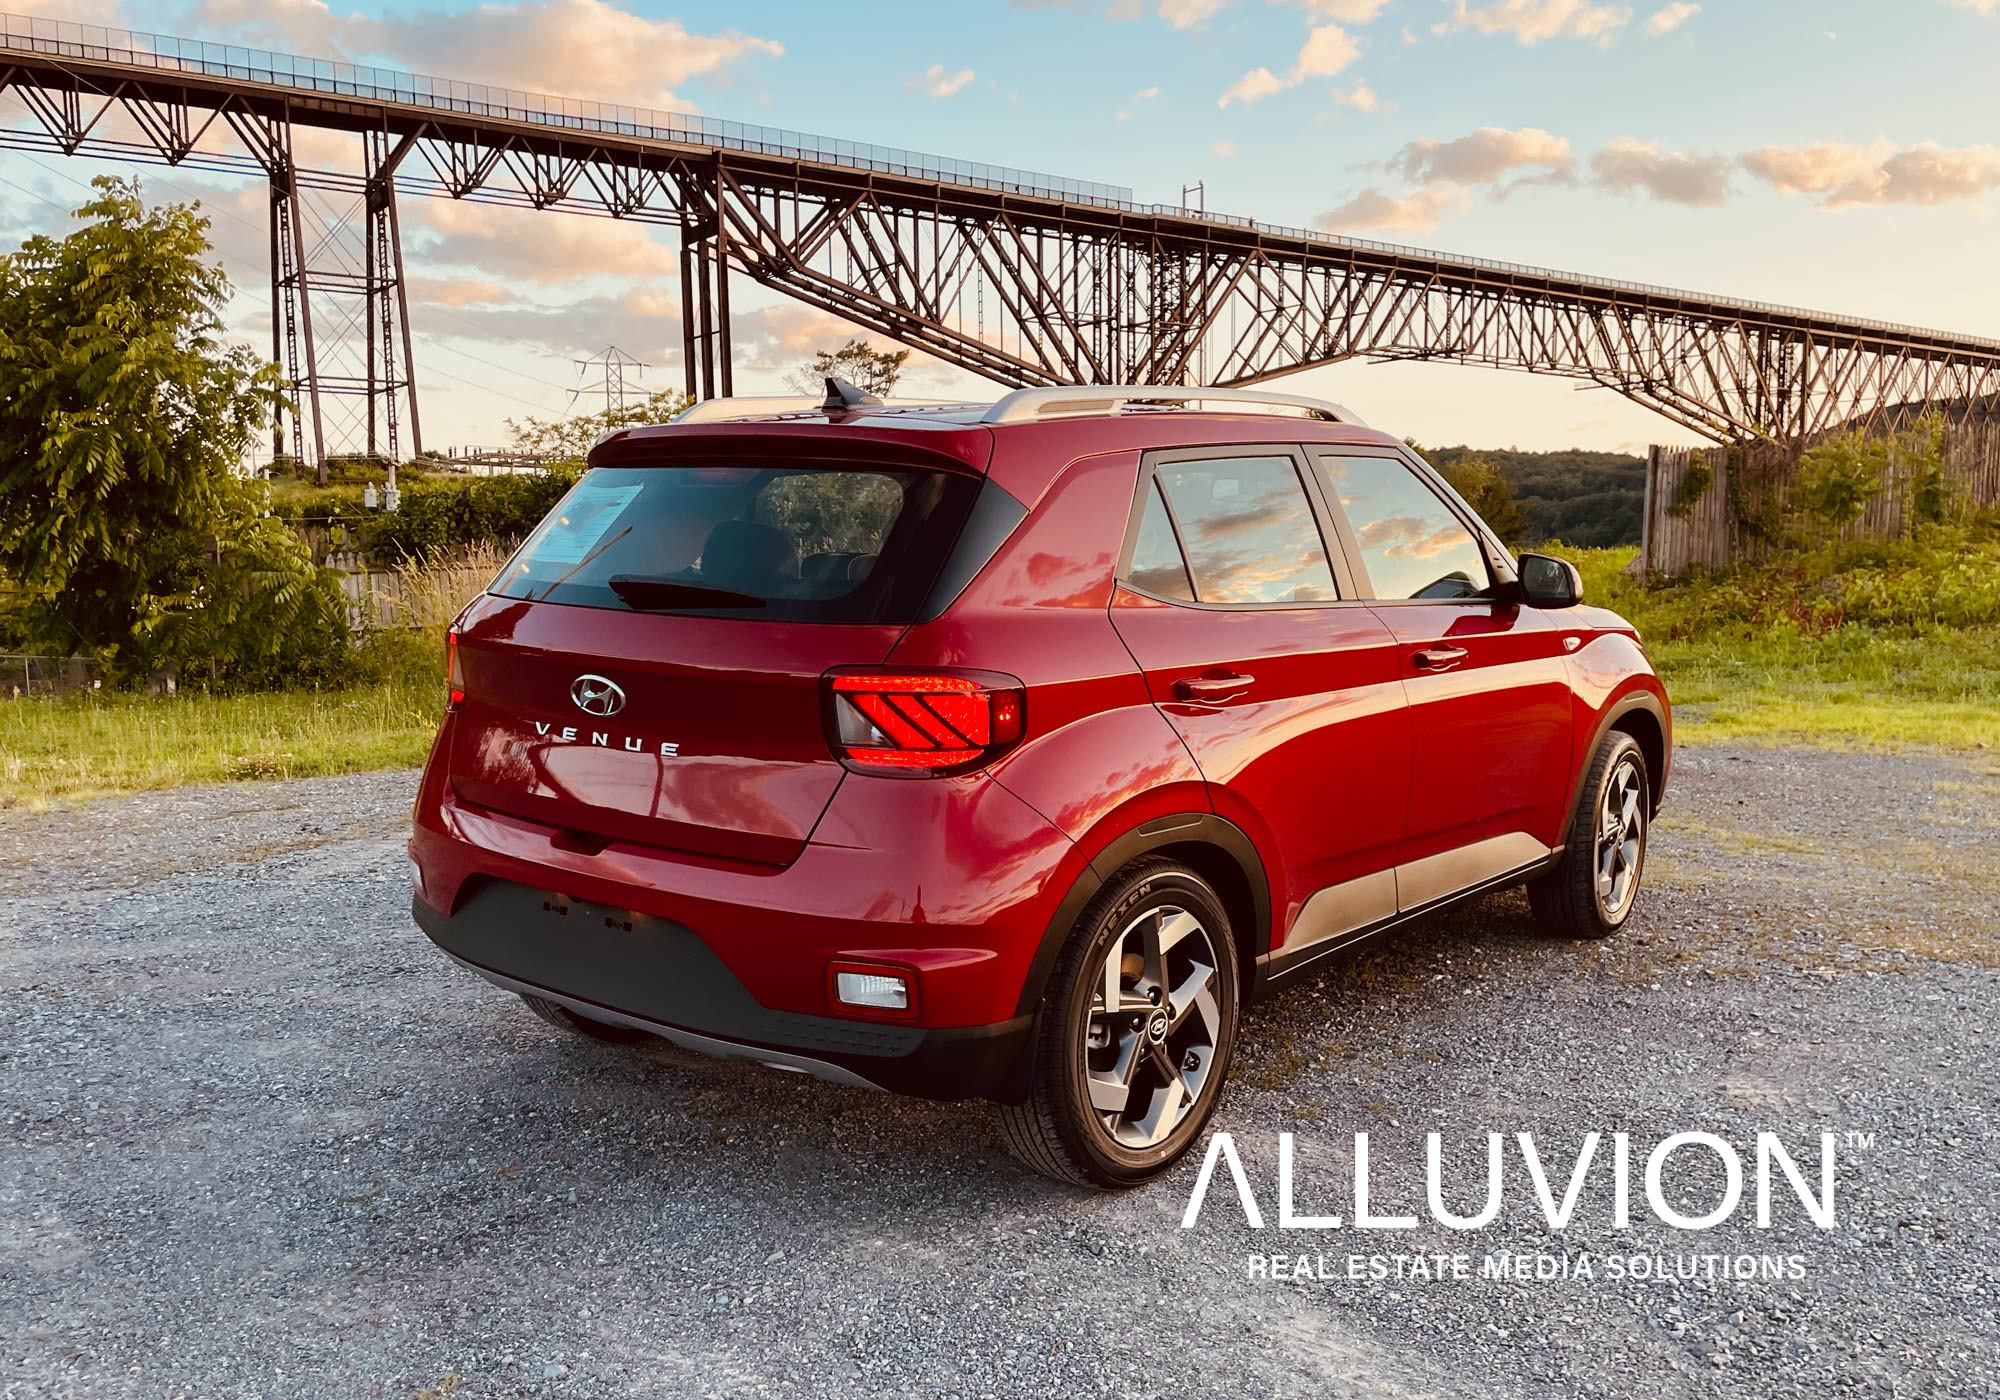 Turo Car Rental Platform Arrives in New York and the Hudson Valley to Save You Money on Your Next Trip – Turo Car Rental Photography by Alluvion Media